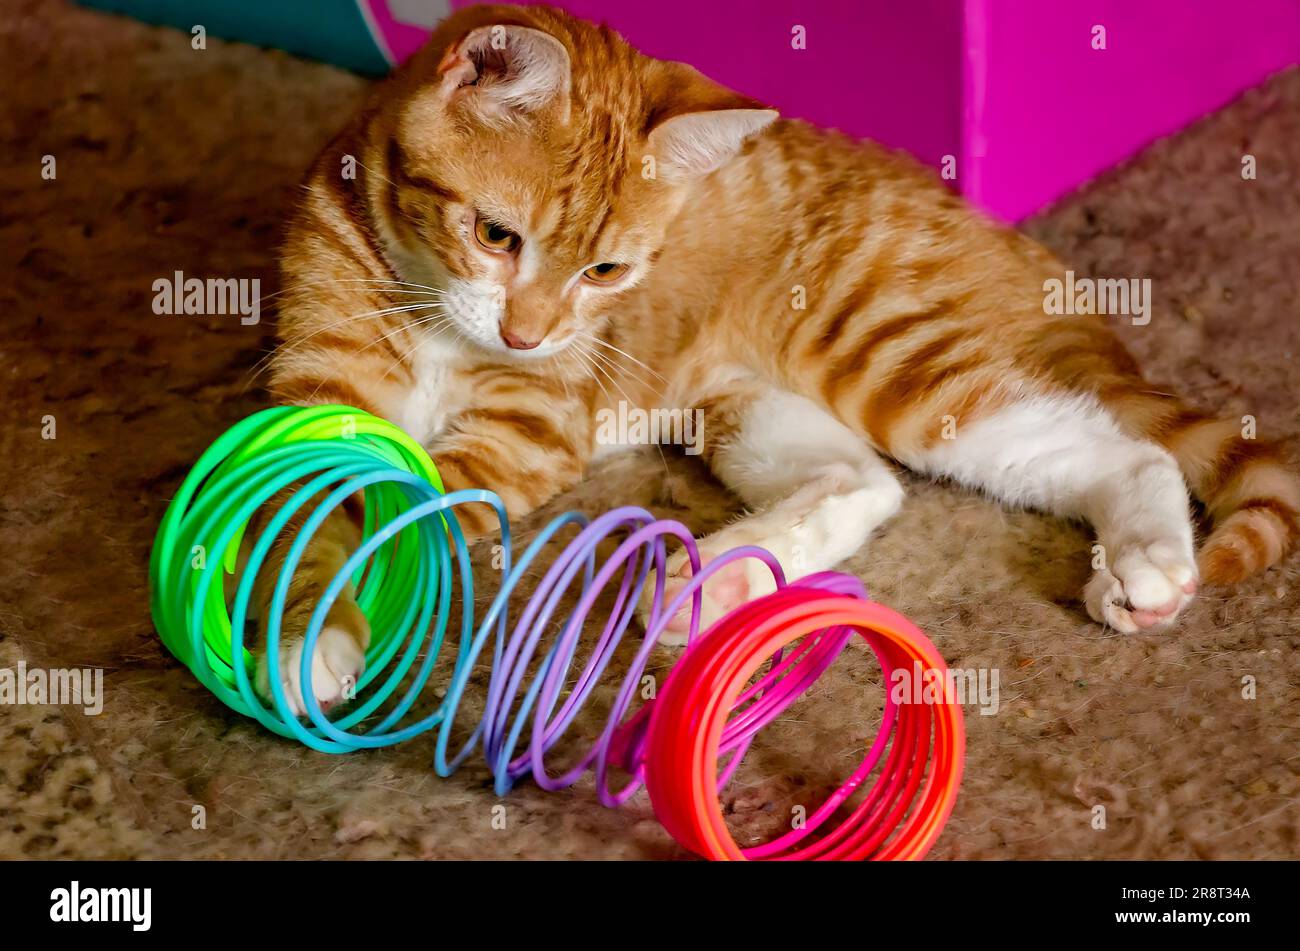 Wolfie, an 8-week-old orange and white kitten, plays with a plastic Slinky spring toy, June 7, 2023, in Coden, Alabama. Stock Photo